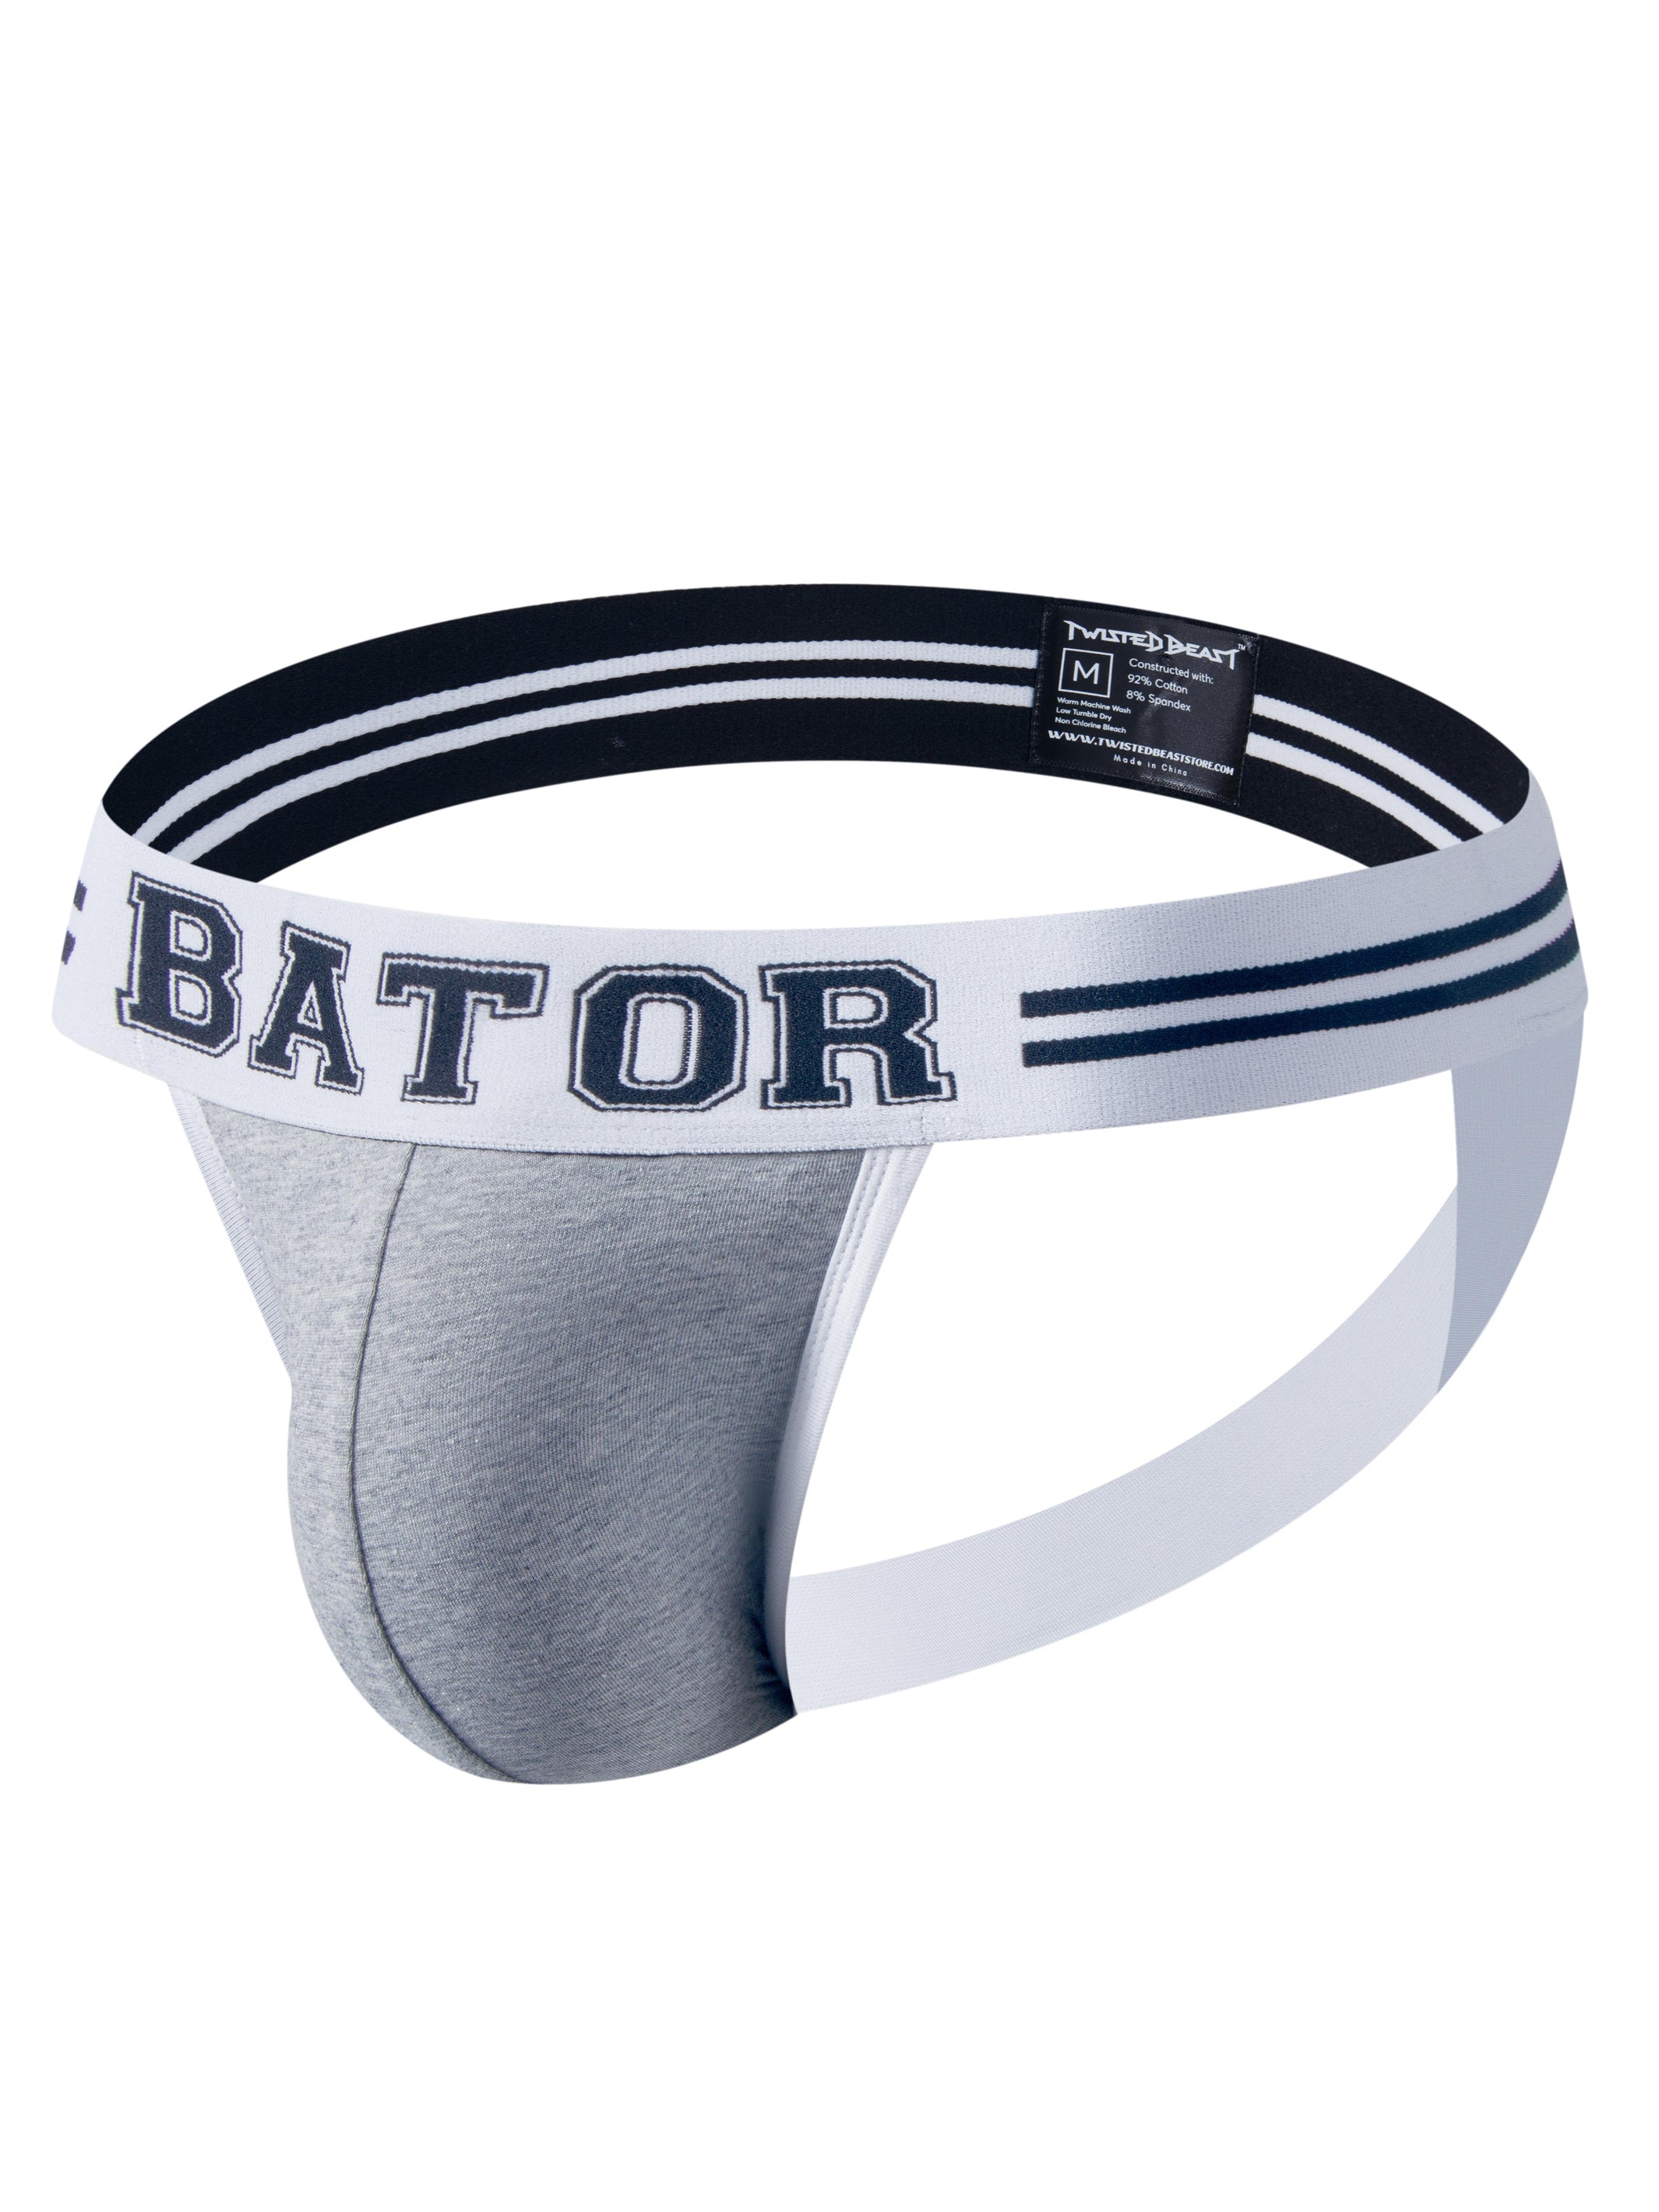 A product photo of a Bator Jock in grey.